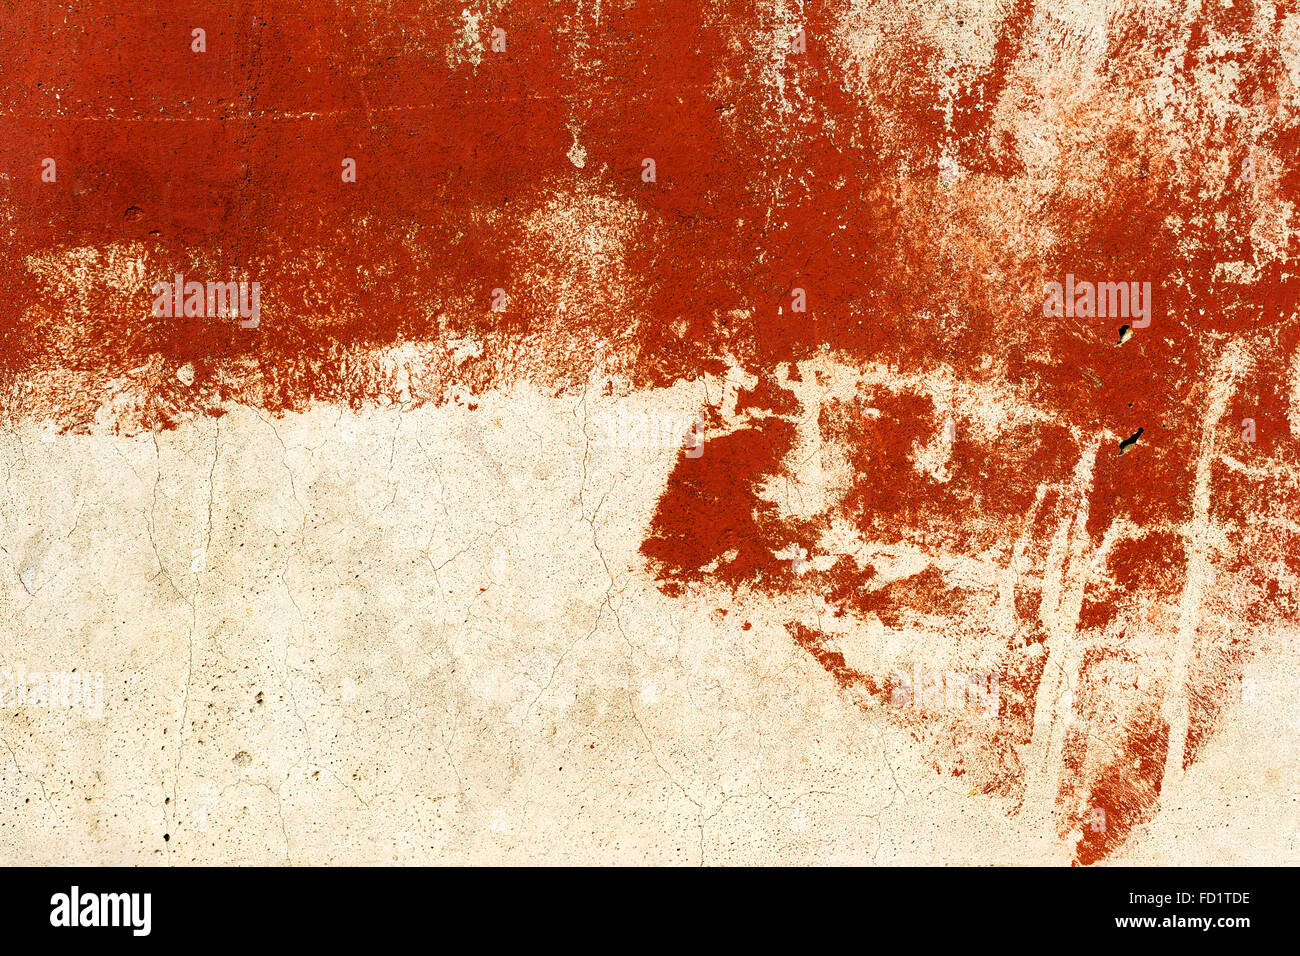 Vintage old damaged wall with cracks, scratches, painted with red paint. Textured background for your concept or project. Great Stock Photo